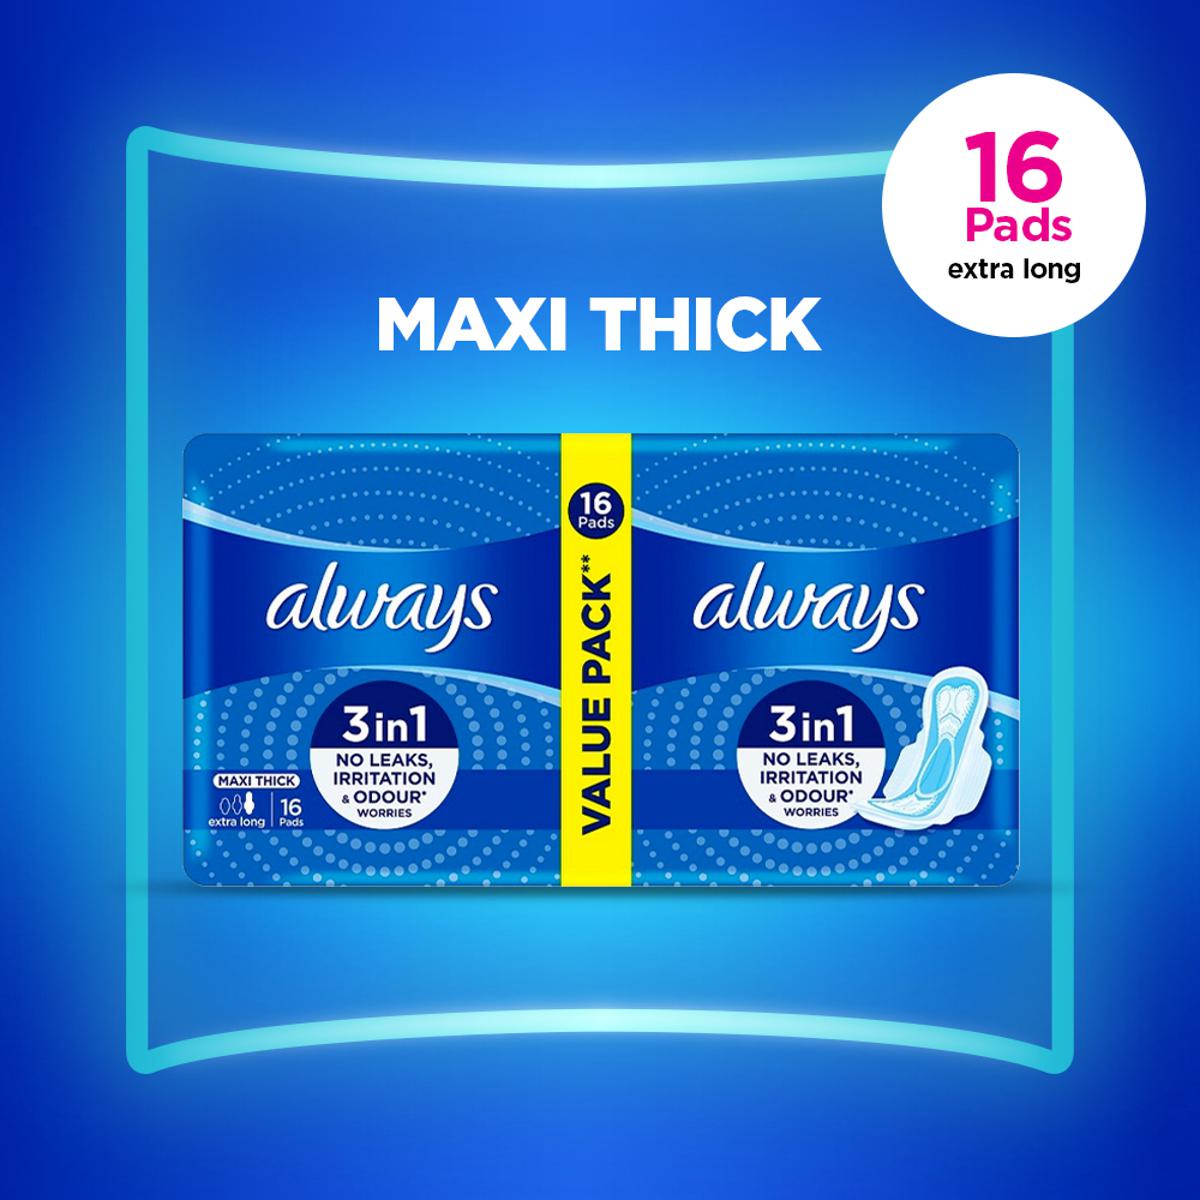 Always Thicks Maxi Sanitary Pads Extra Long Value Pack 16 pads